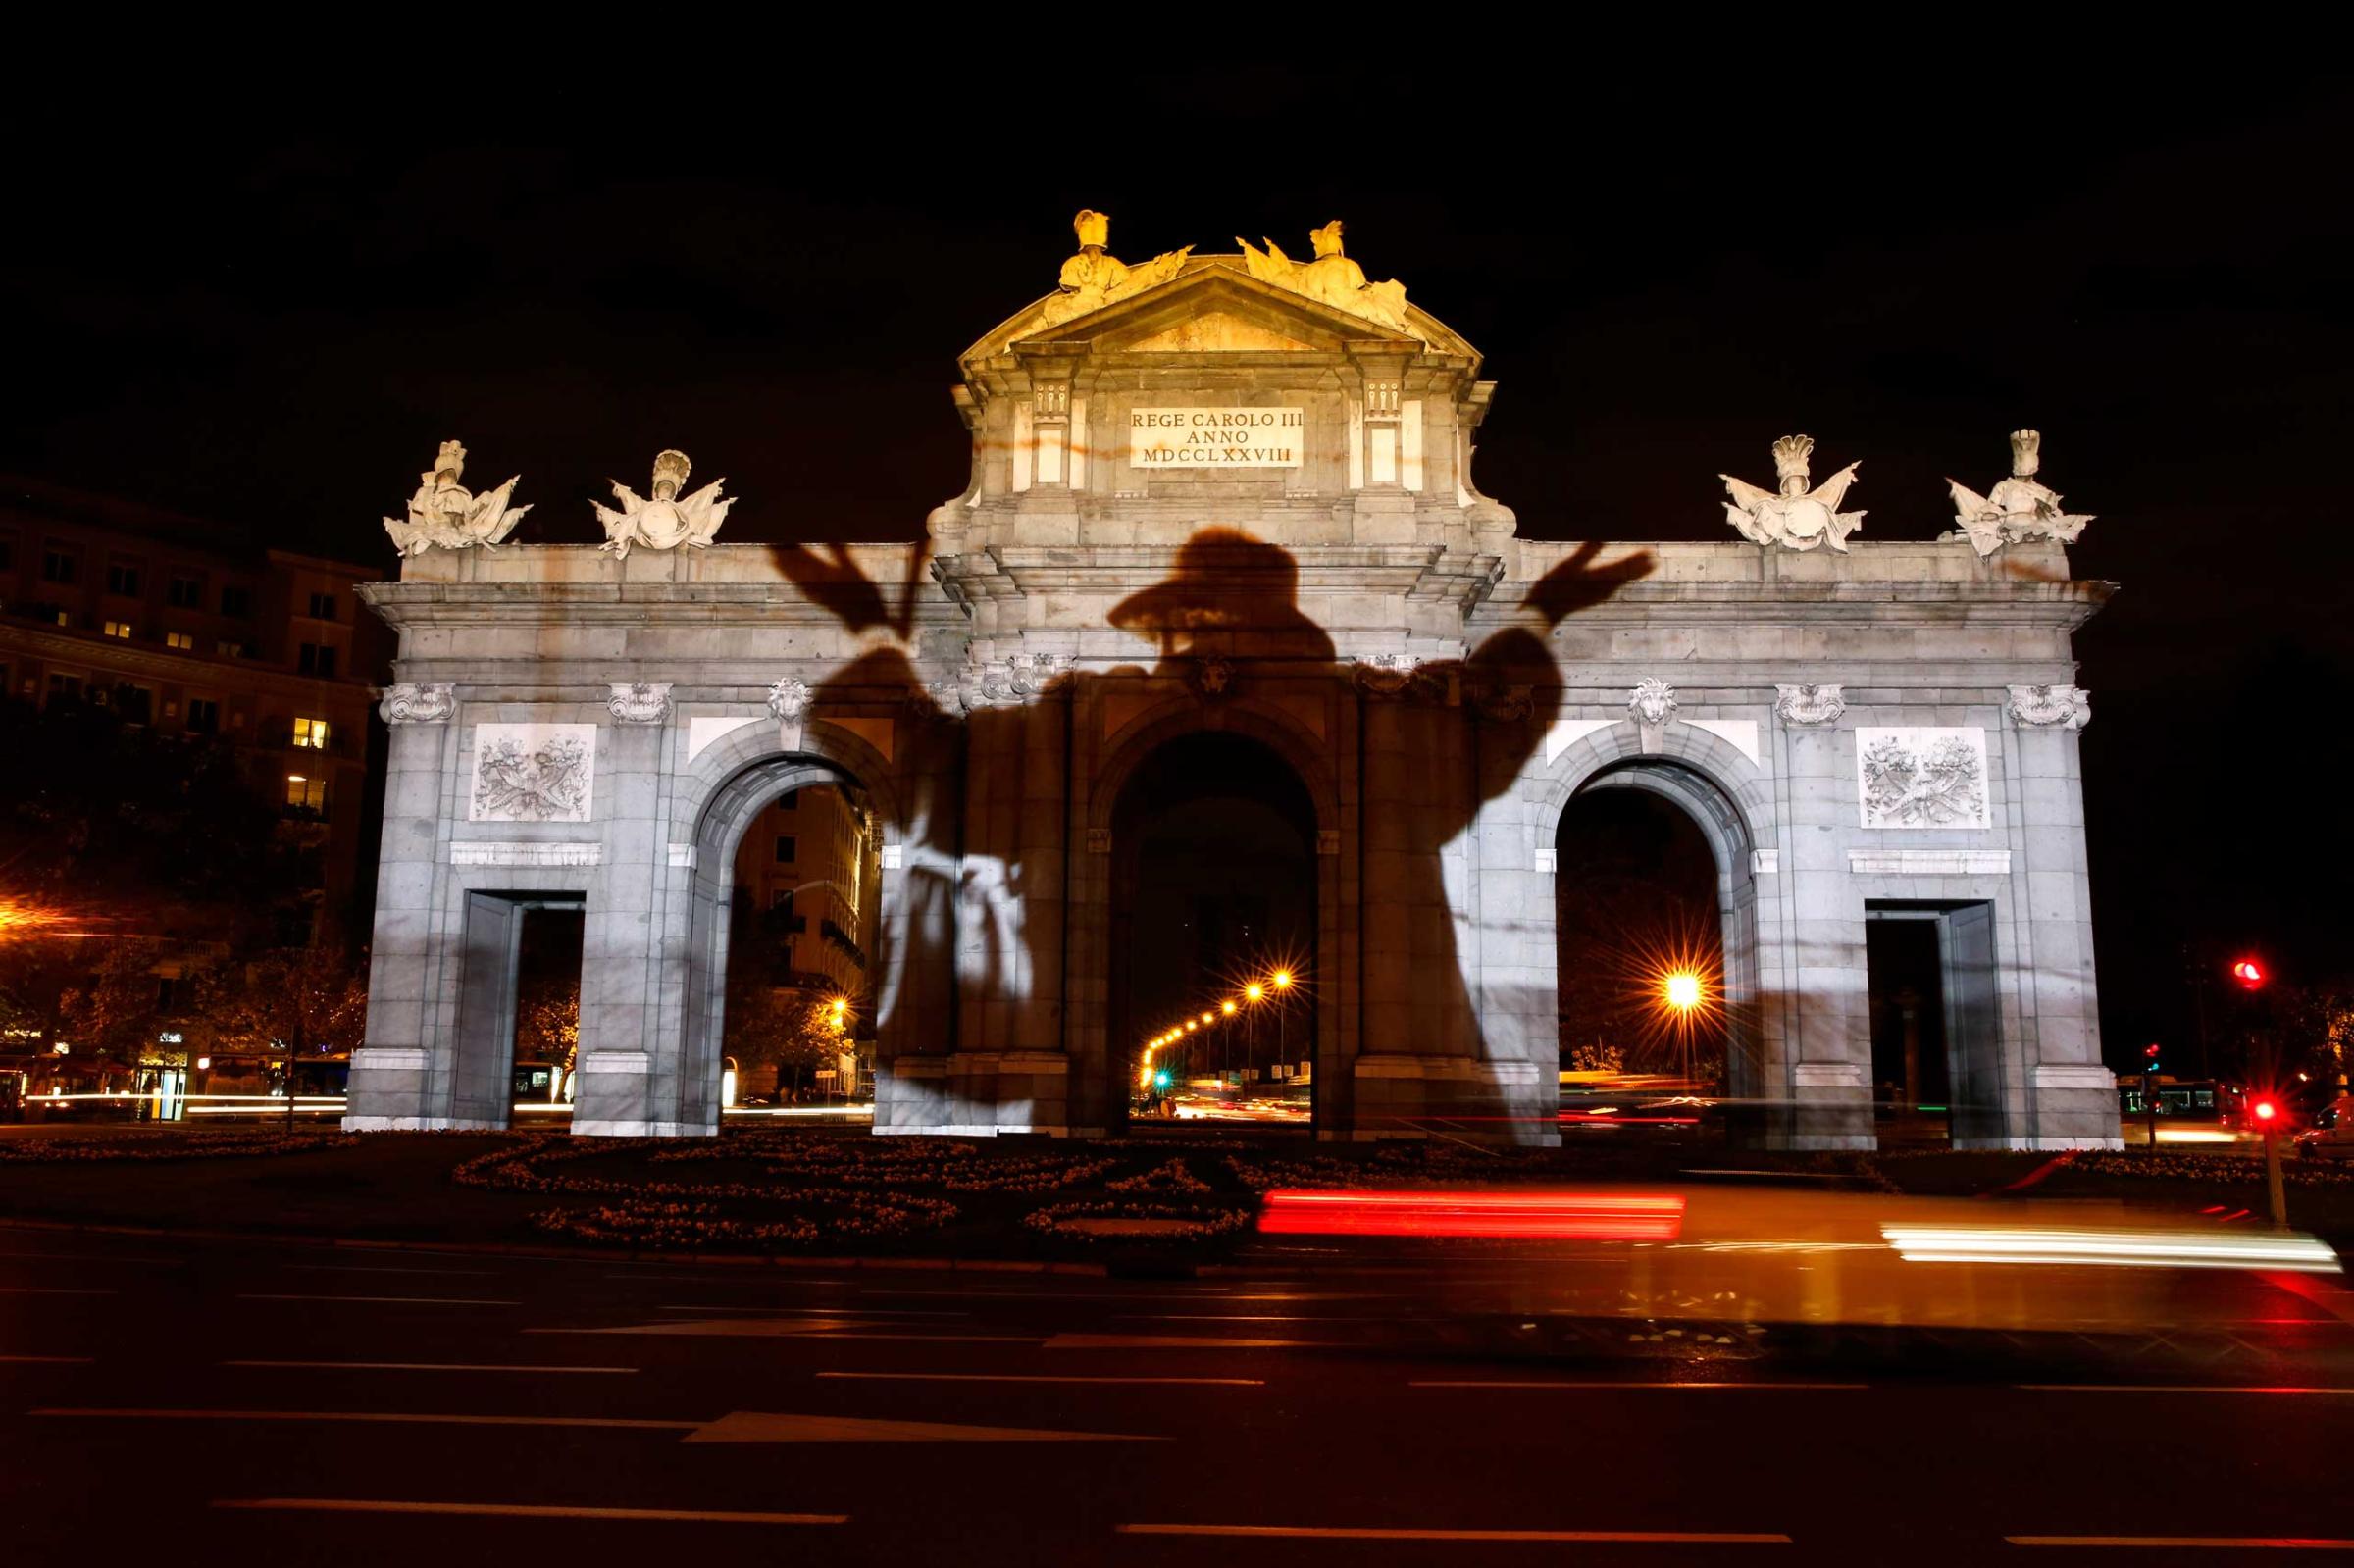 Historic image commemorating the former Berlin Wall is projected on Alcala Gate in Madrid